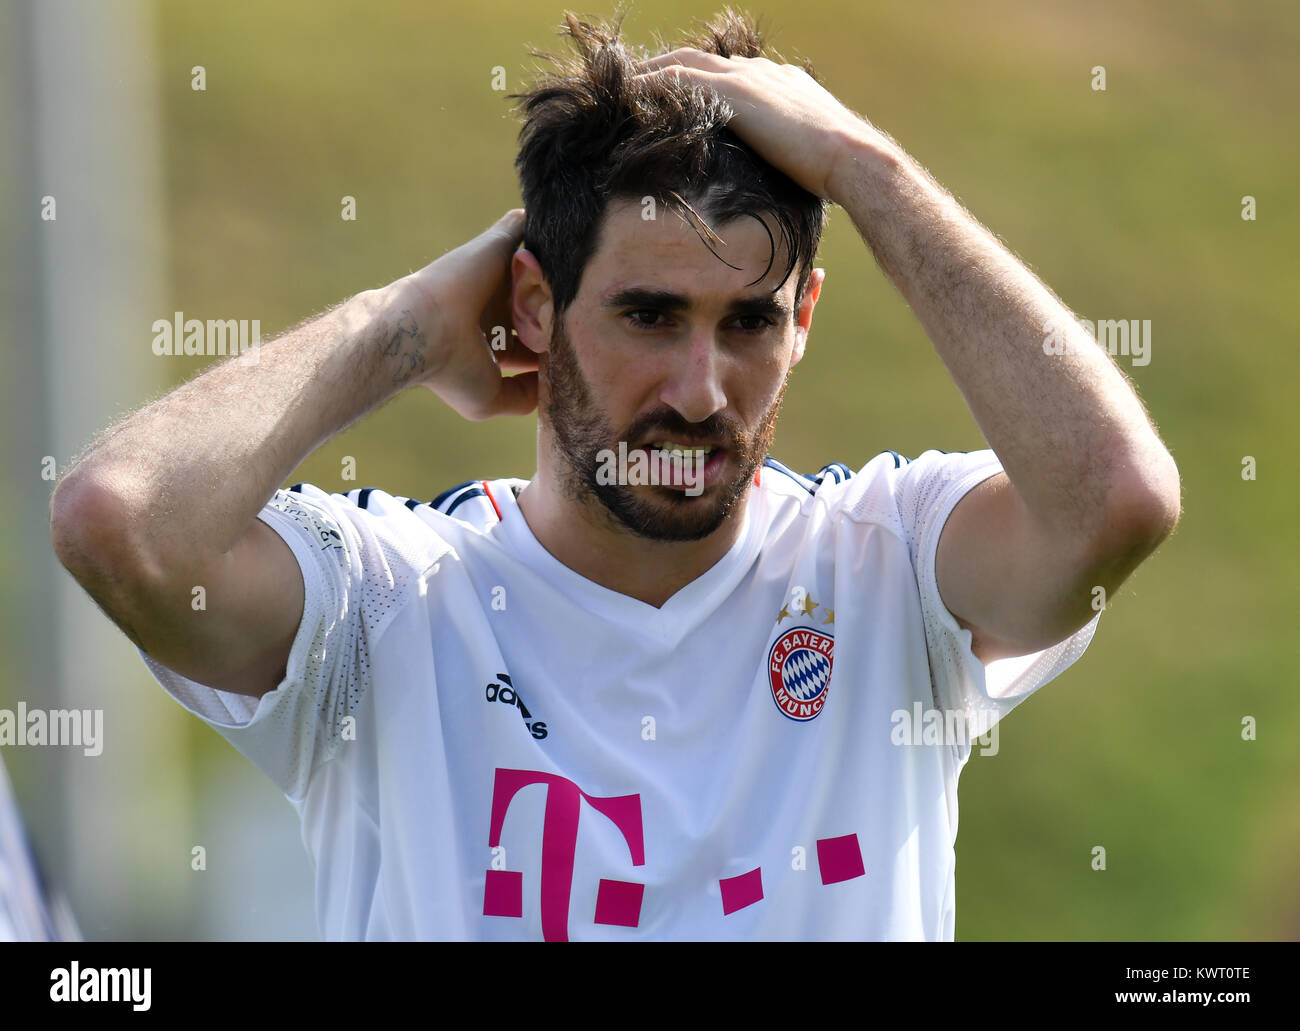 Doha, Qatar. 5th Jan, 2018. Bayern Munich's Javi Martinez takes part in a training session during the team's winter training camp at the Aspire Academy of Sports Excellence in Doha, Qatar, on Jan. 5, 2018. Credit: Nikku/Xinhua/Alamy Live News Stock Photo